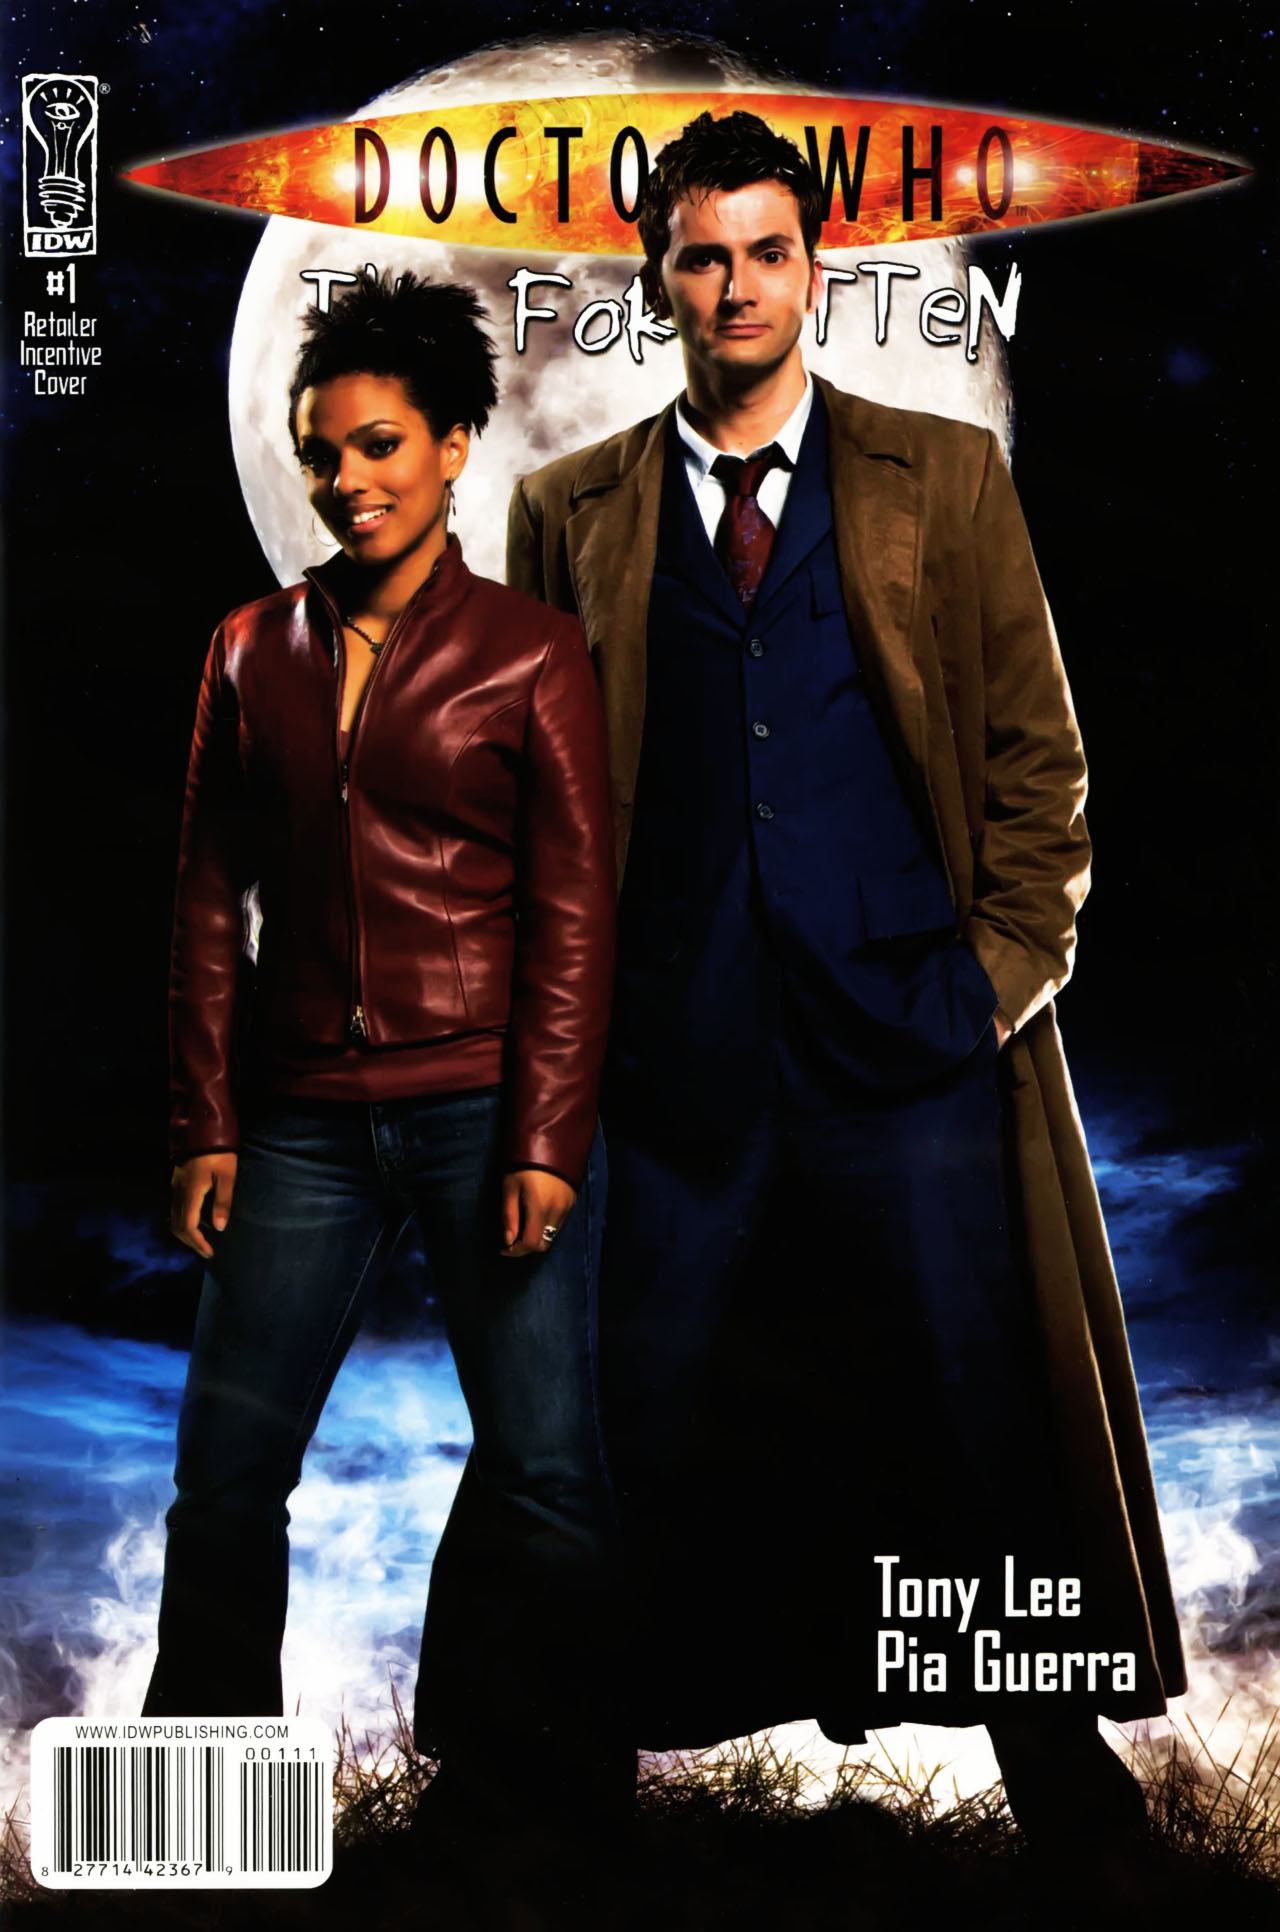 Read online Doctor Who: The Forgotten comic -  Issue #1 - 2